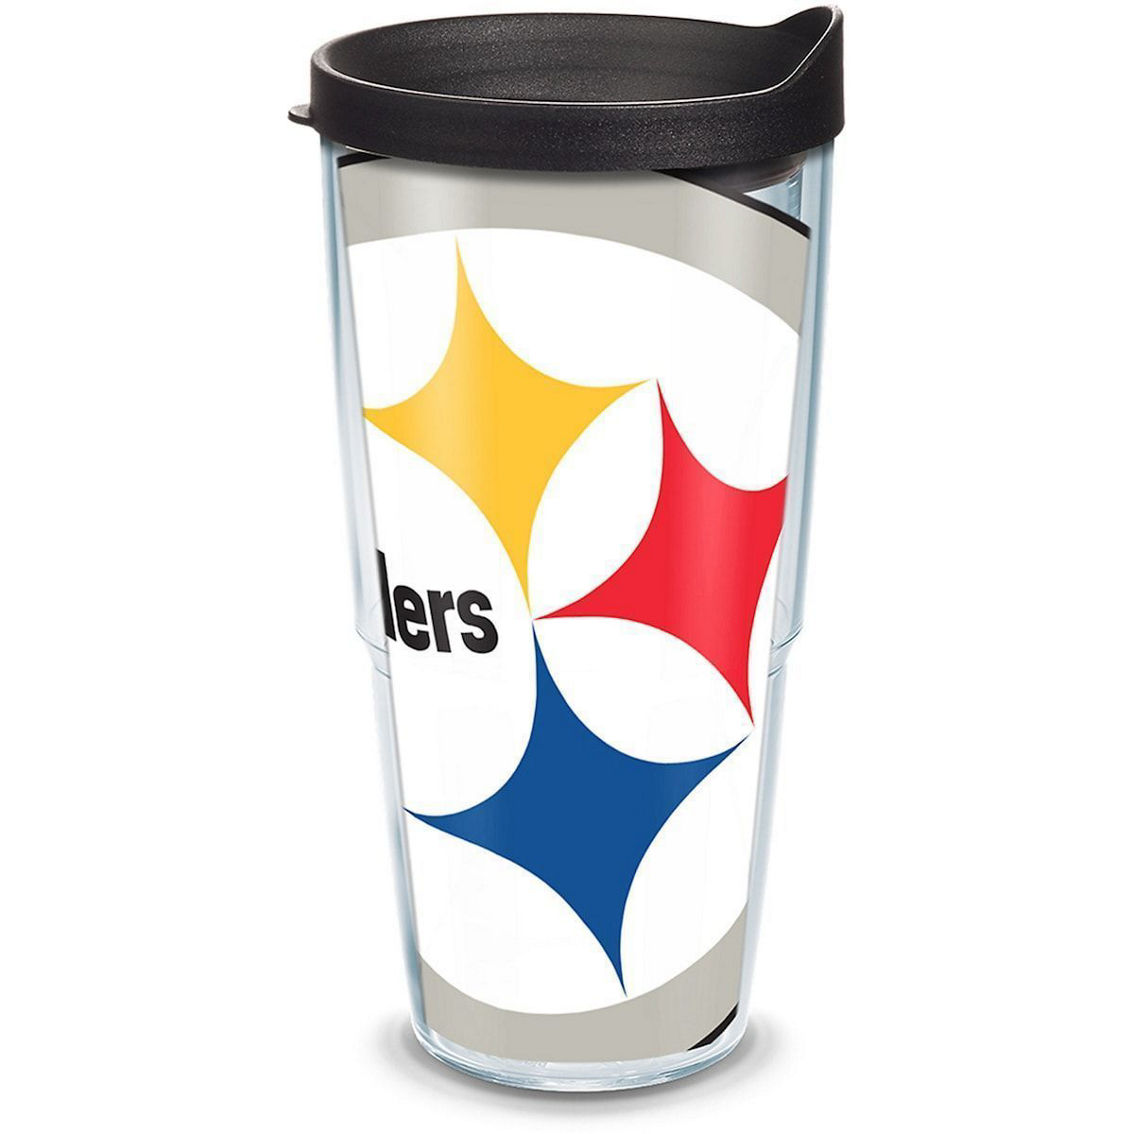 tervis, Kitchen, Tervis Pittsburgh Steelers Cup